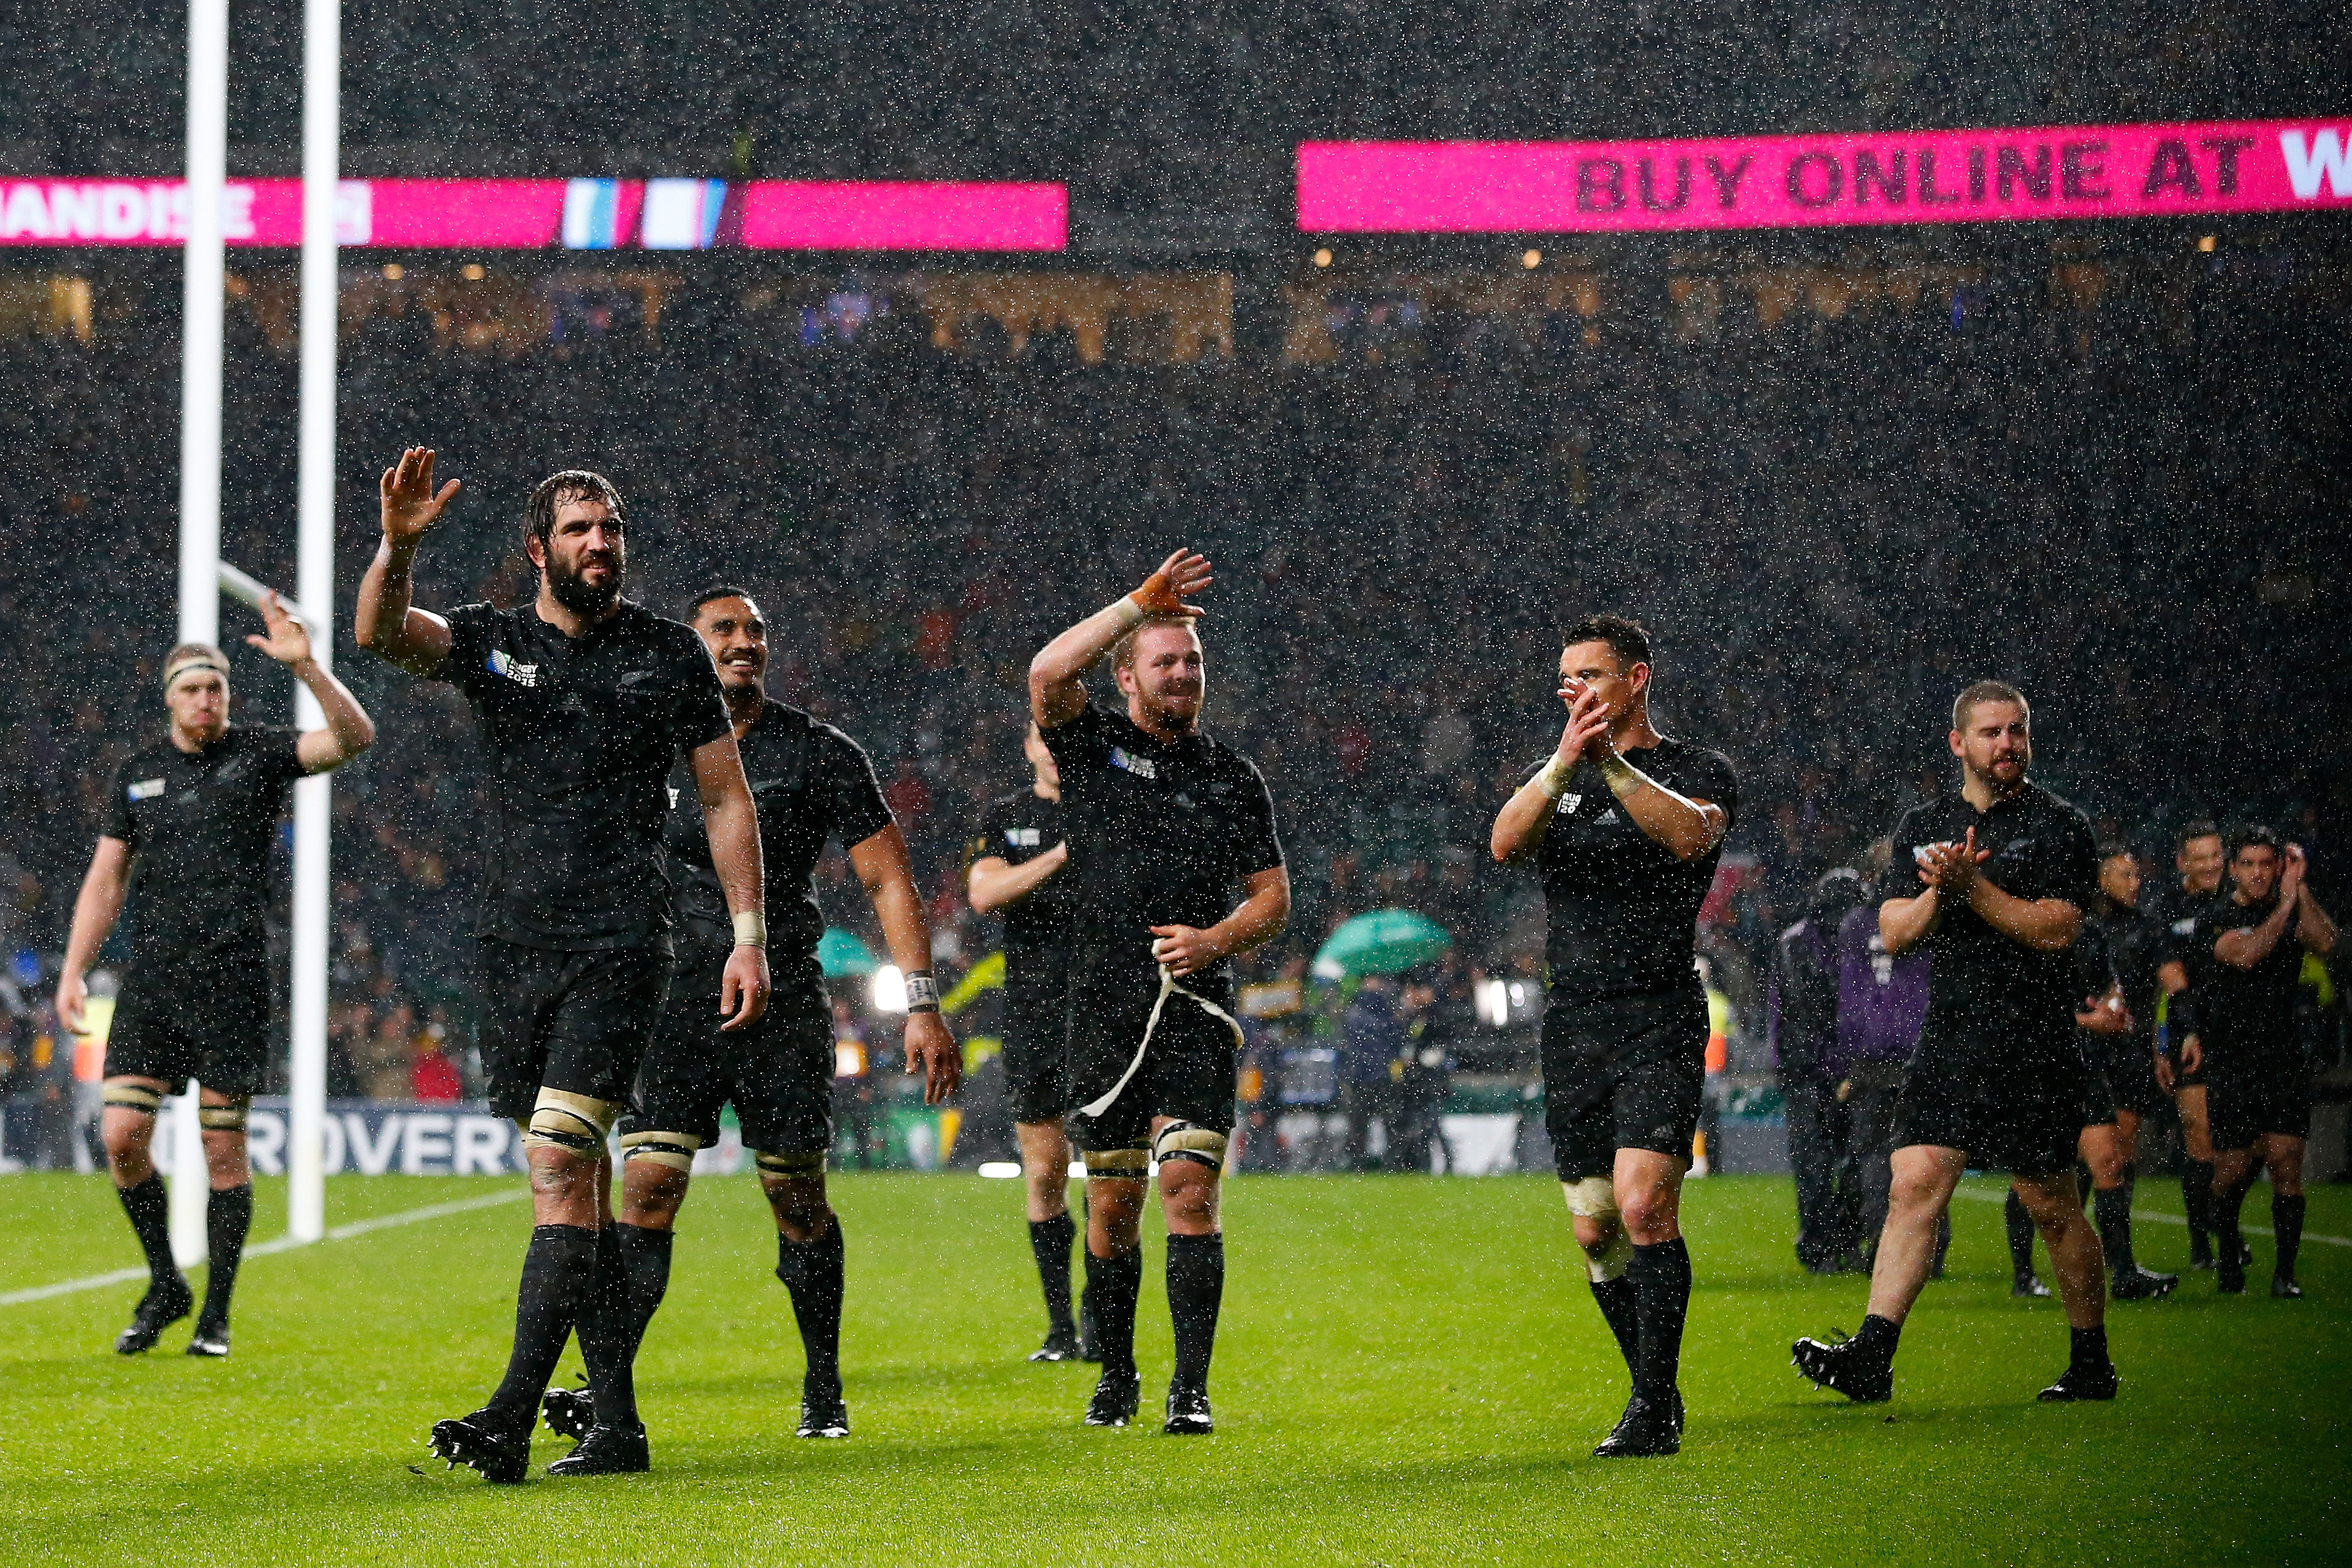 Sam Whitelock test caps The defining matches of All Blacks most-capped player